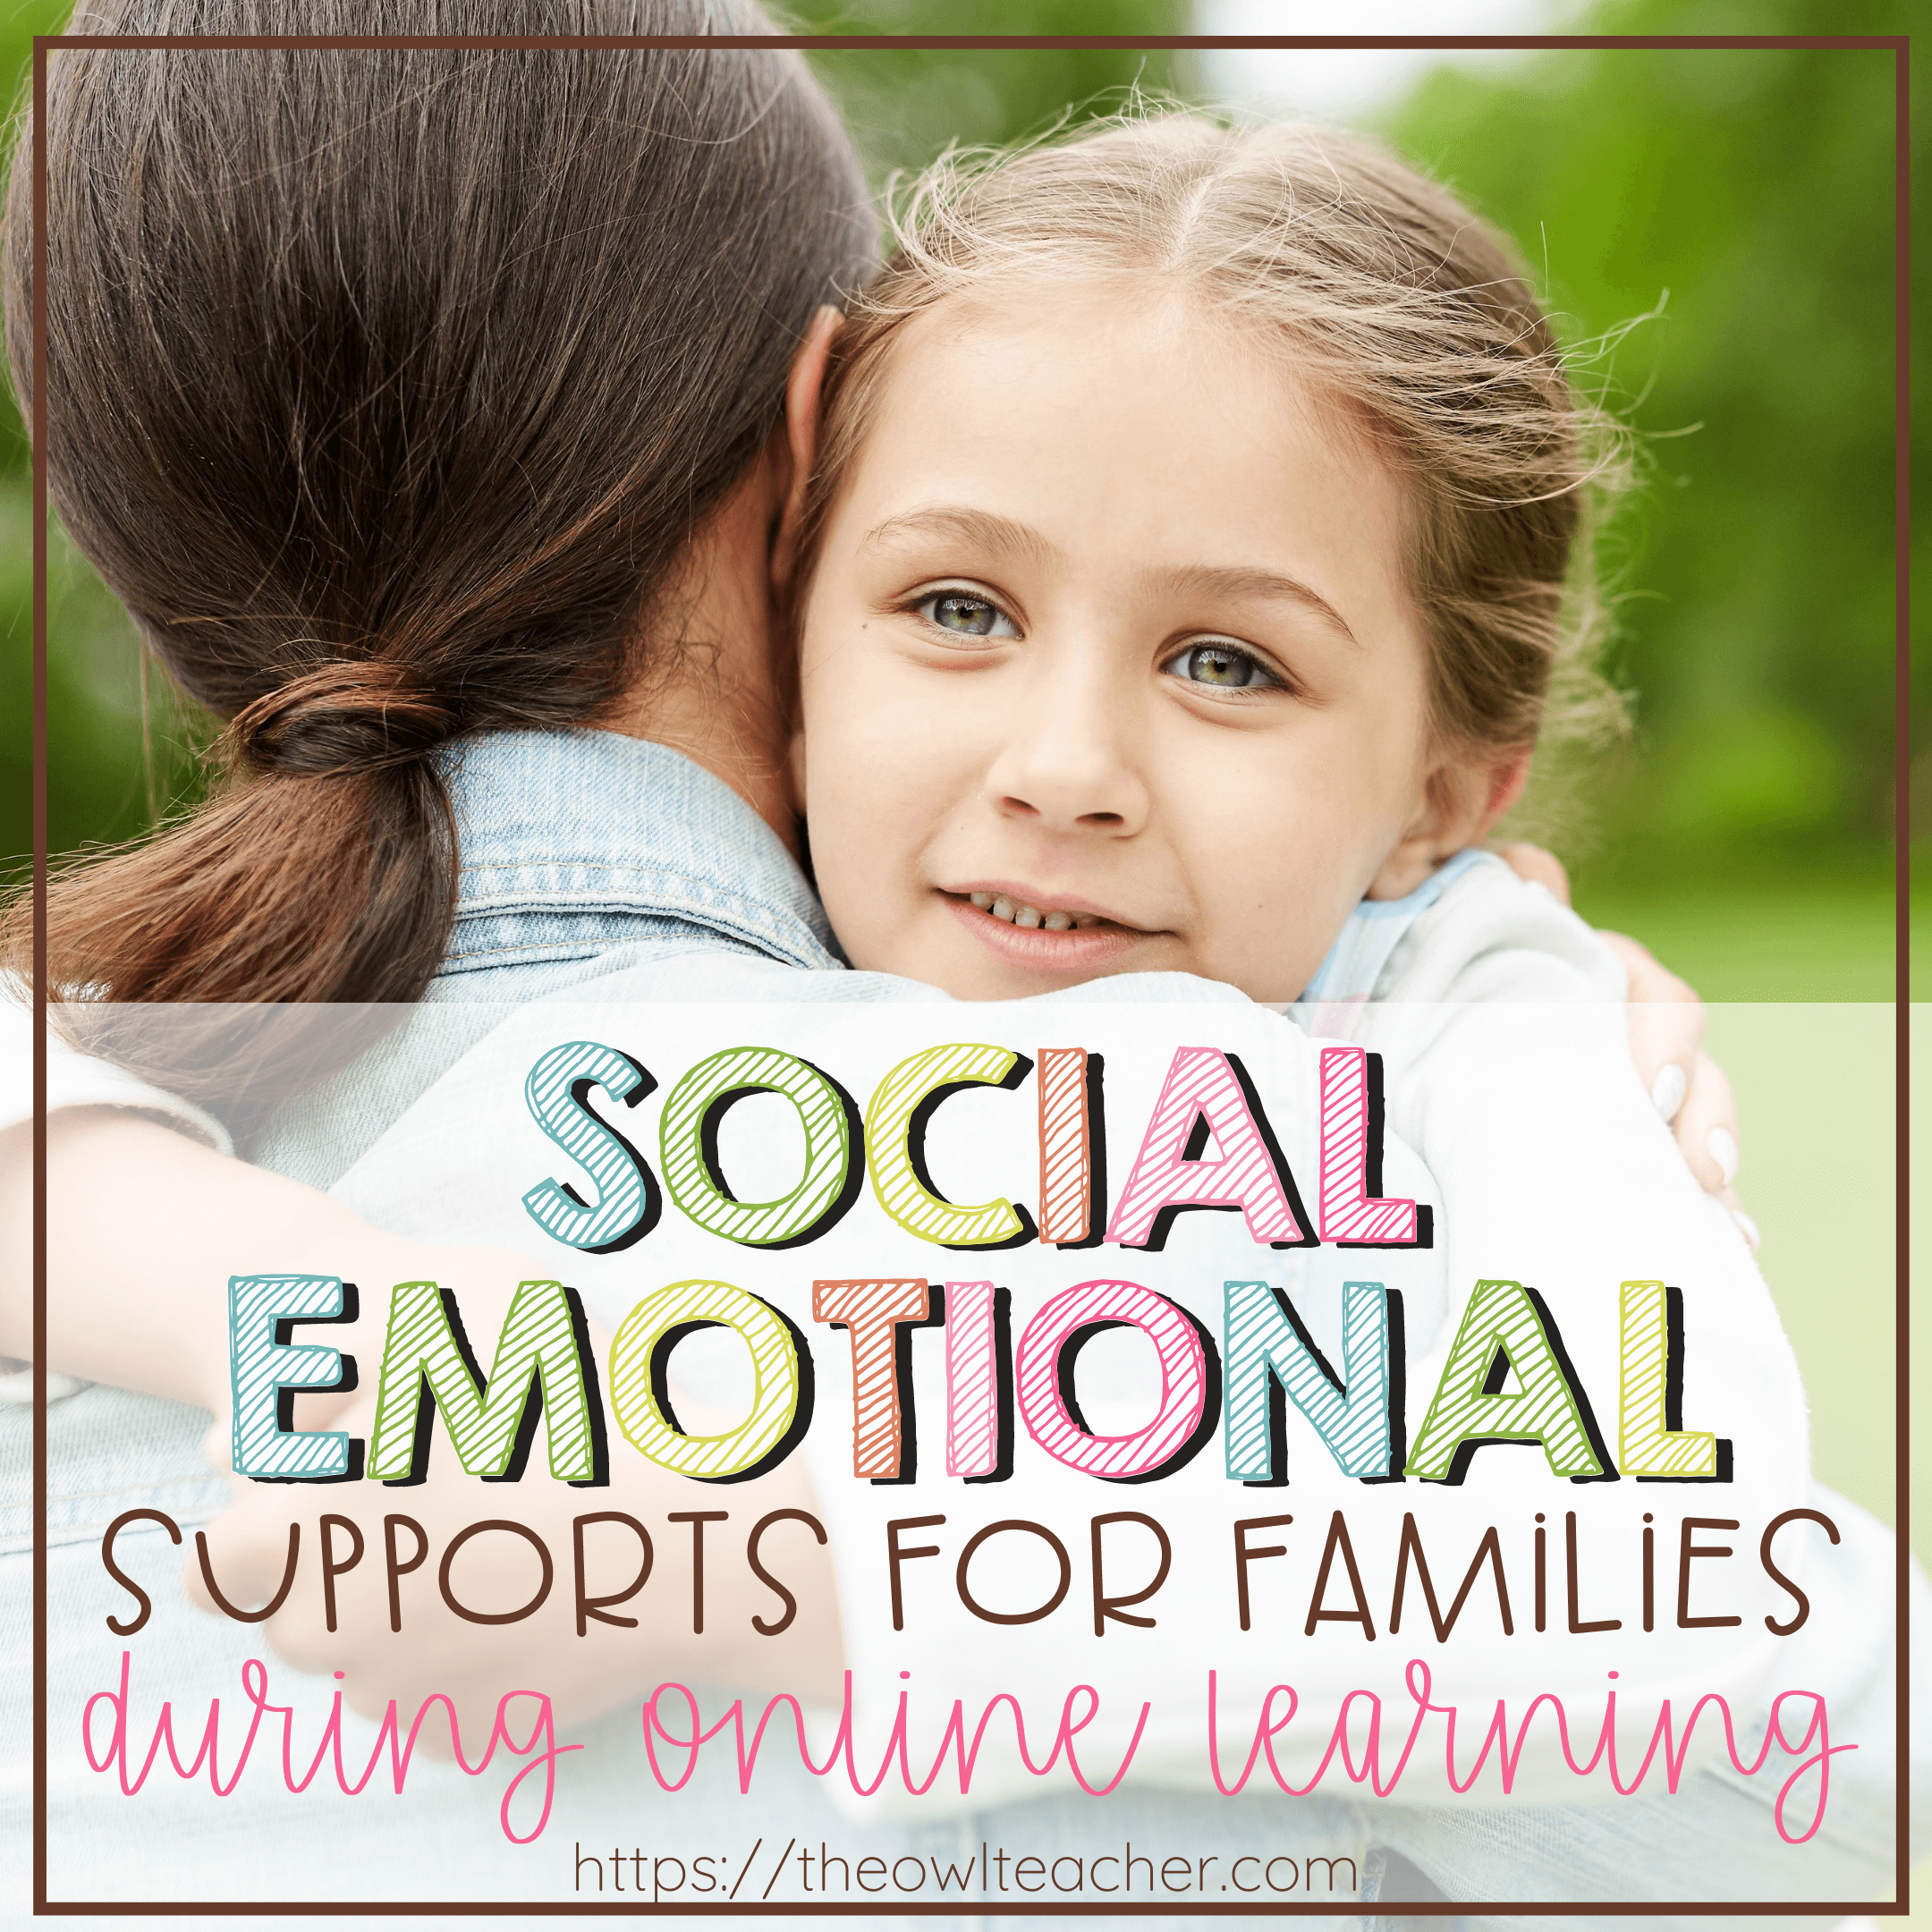 Right now during distance learning or a hybrid teaching approach, families need some social-emotional supports to help them. This post provides a few tips to help you with online teaching and providing those supports.